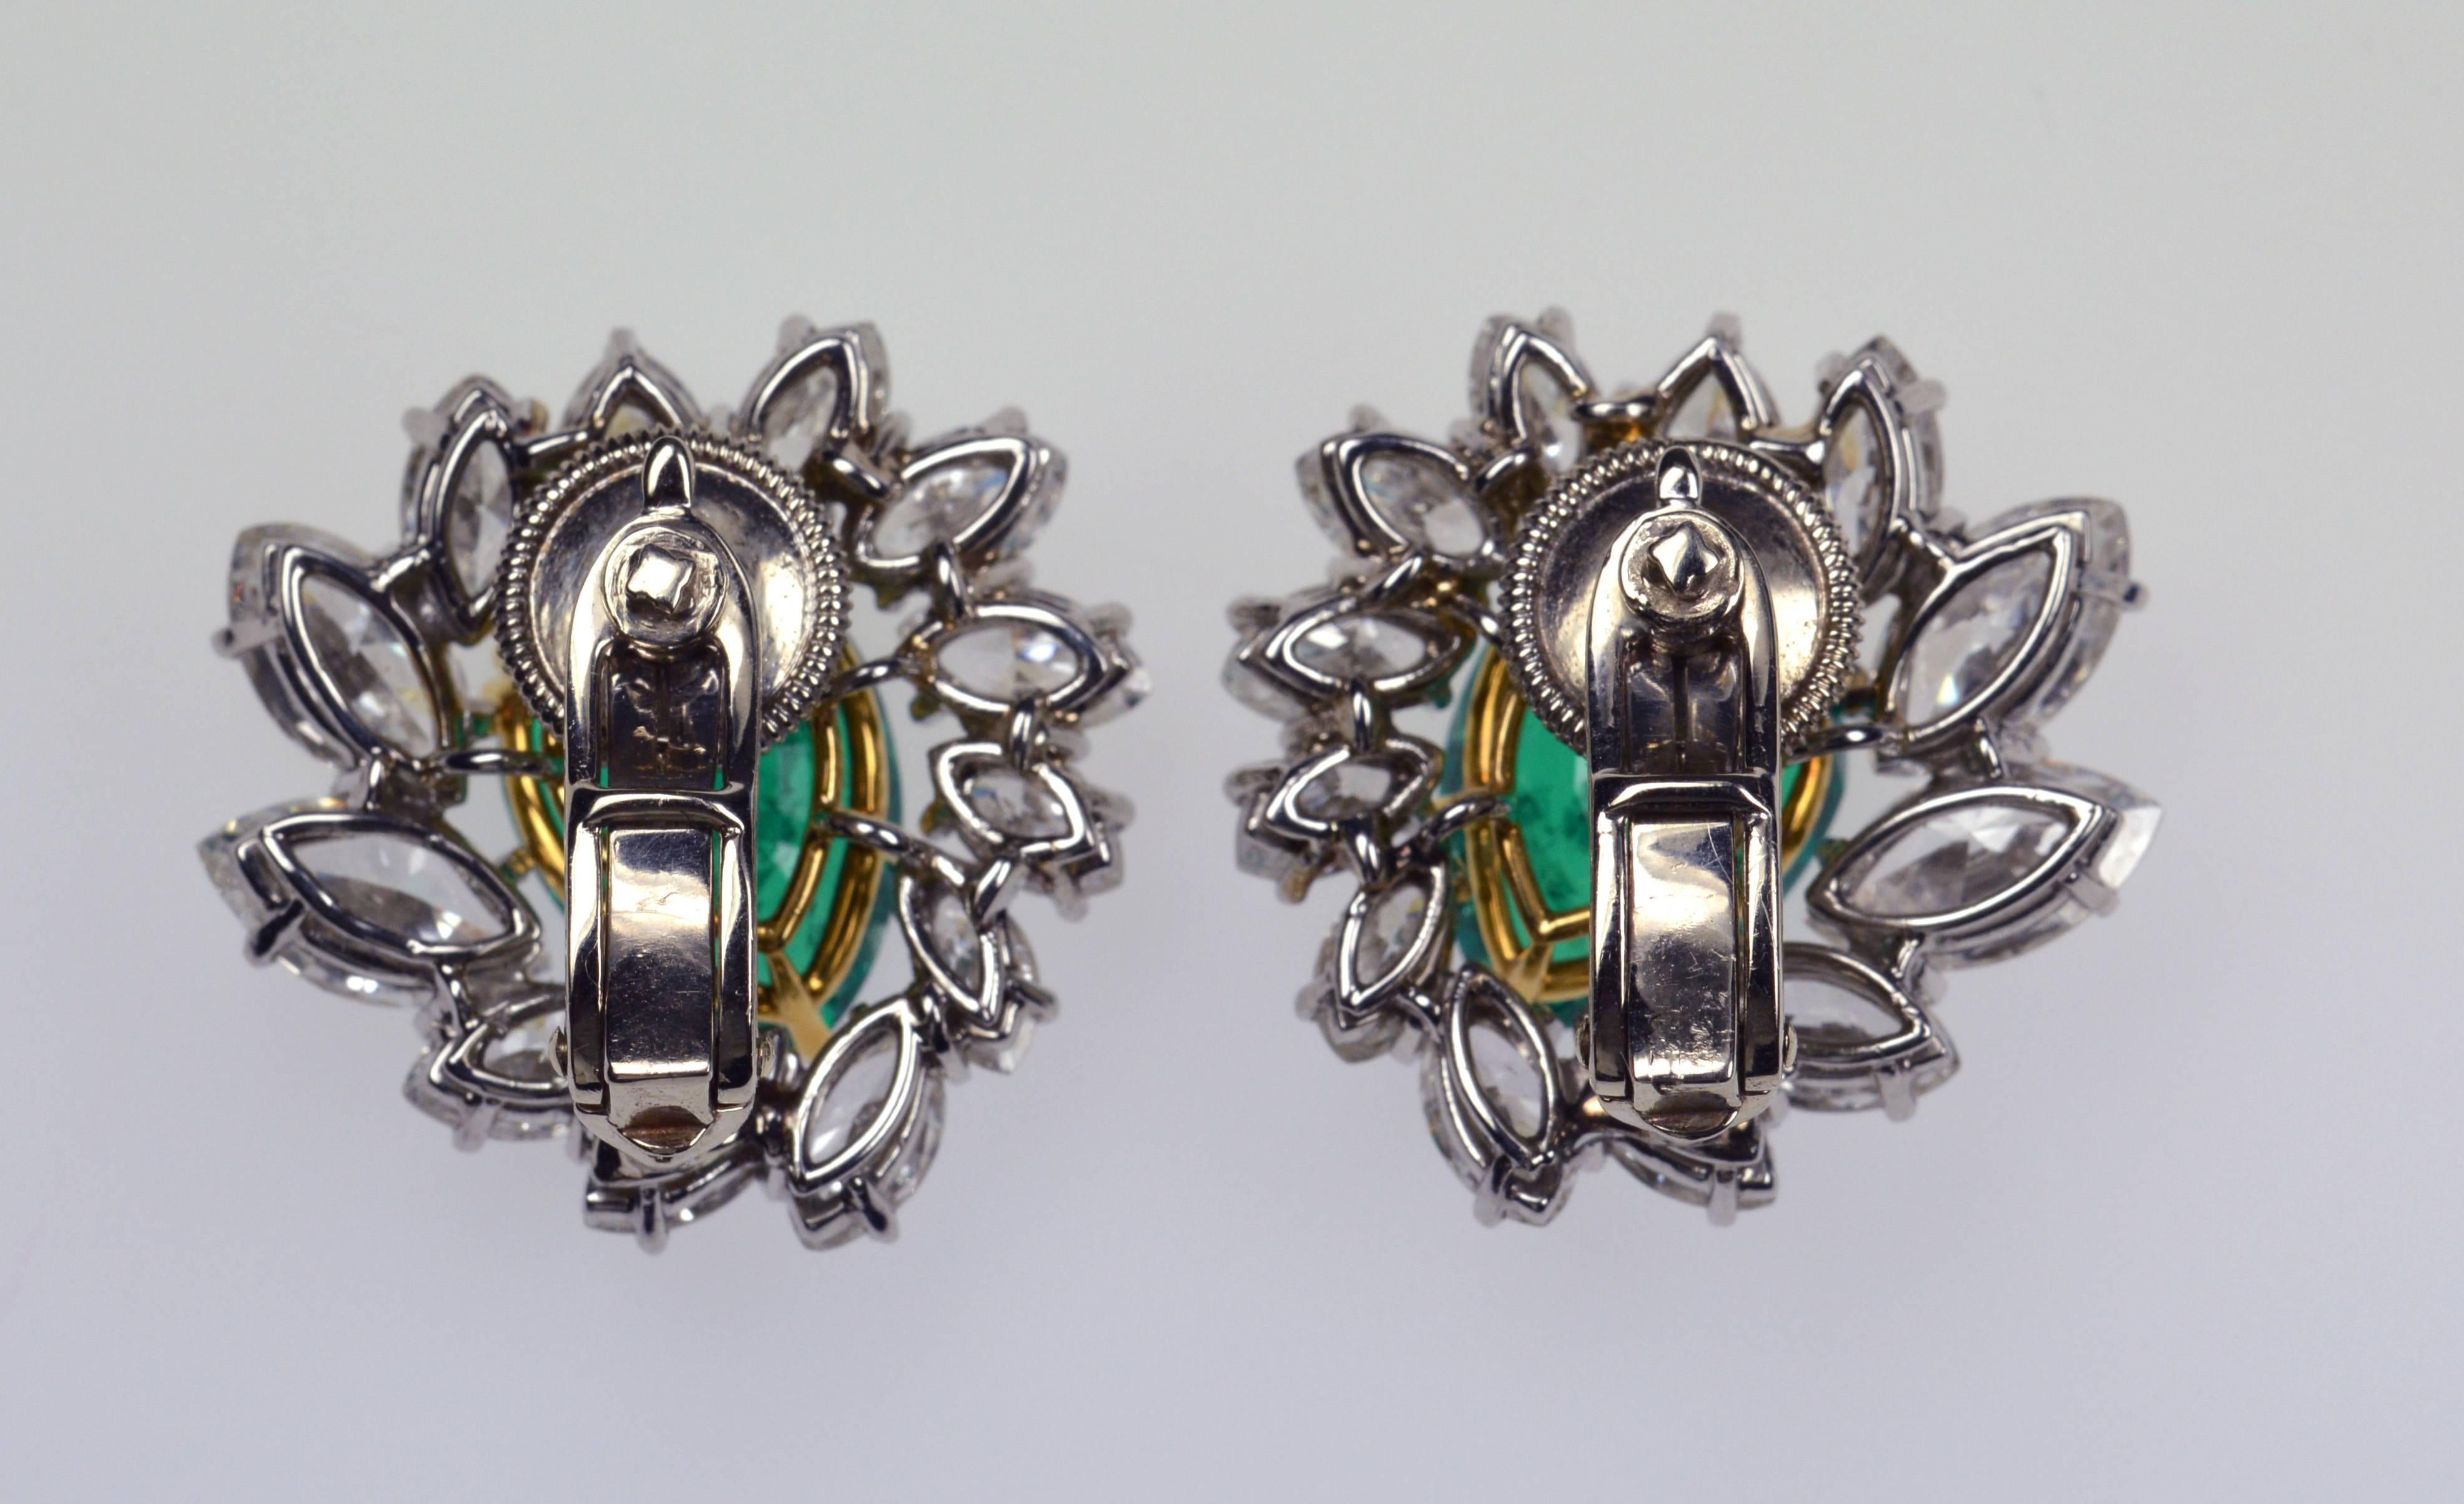 Cartier 1970s-1980s earclips. Two center stone emeralds with a weight of 3.40ct. and 3.20ct. from Colombia moderate, surrounded by 24 pearshape and marquise diamonds total ca. 10.50ct. In 14K and 18K yellow and white gold.
Signature: Cartier, PAT